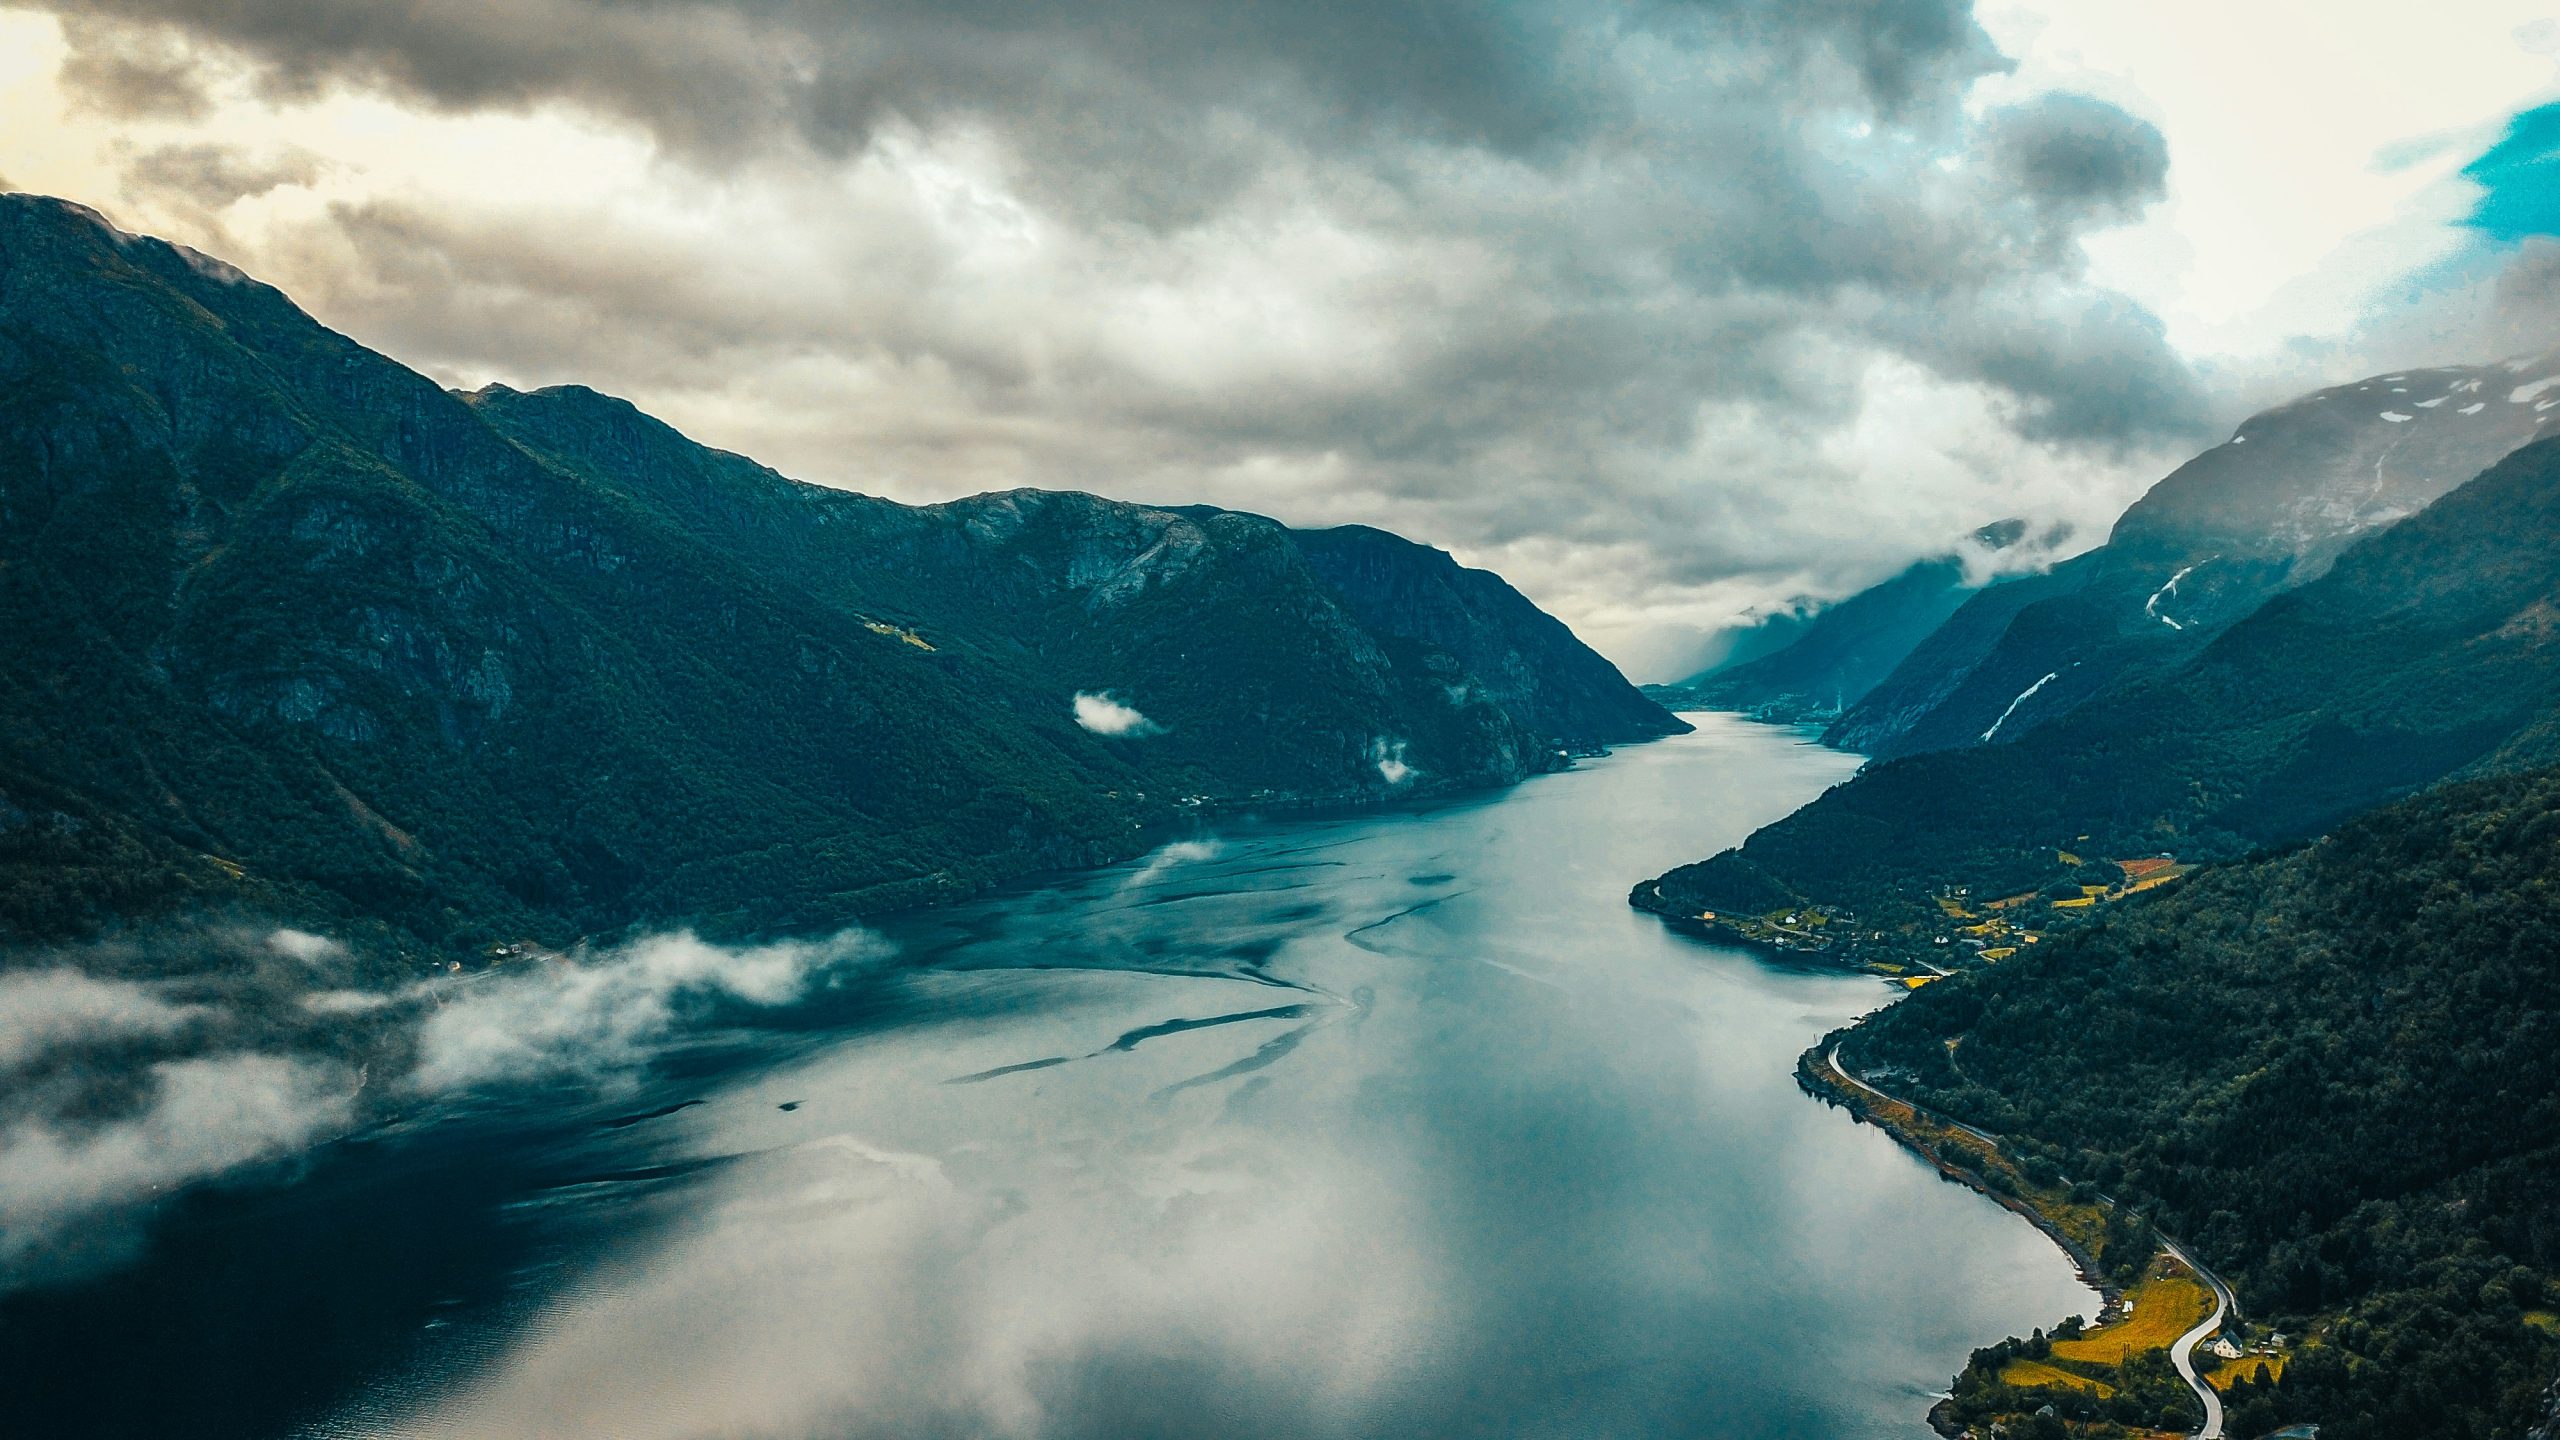 explore the breathtaking fjords of norway, a haven for nature lovers and adventure seekers. discover the stunning landscapes and crystal-clear waters of the fjords on a once-in-a-lifetime trip.